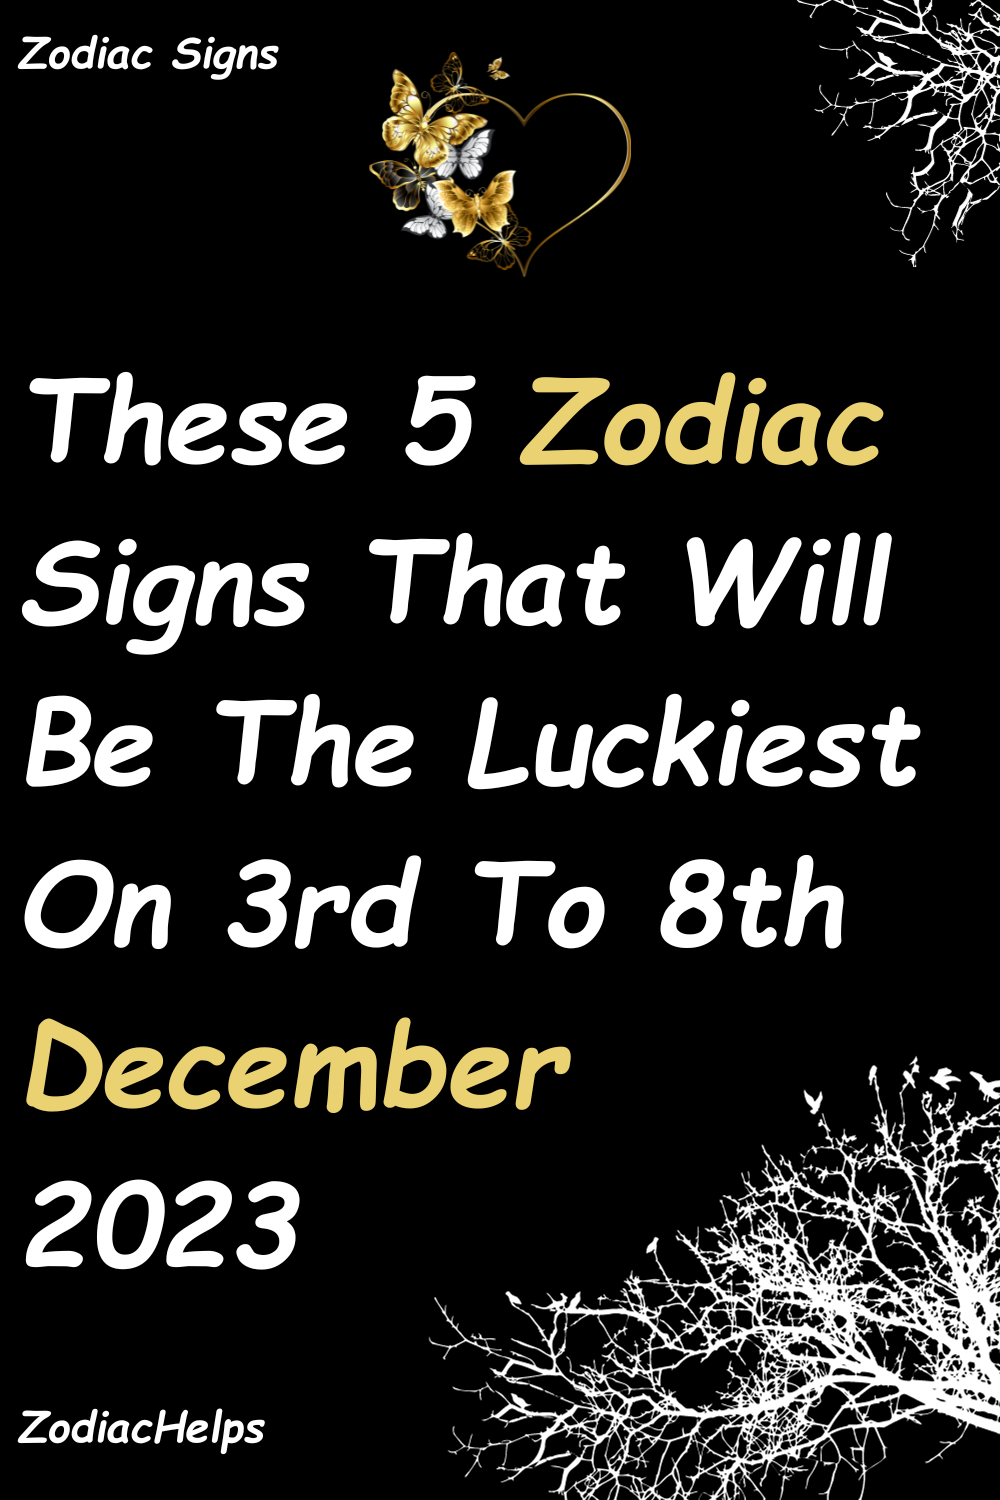 These 5 Zodiac Signs That Will Be The Luckiest On 3rd To 8th December 2023